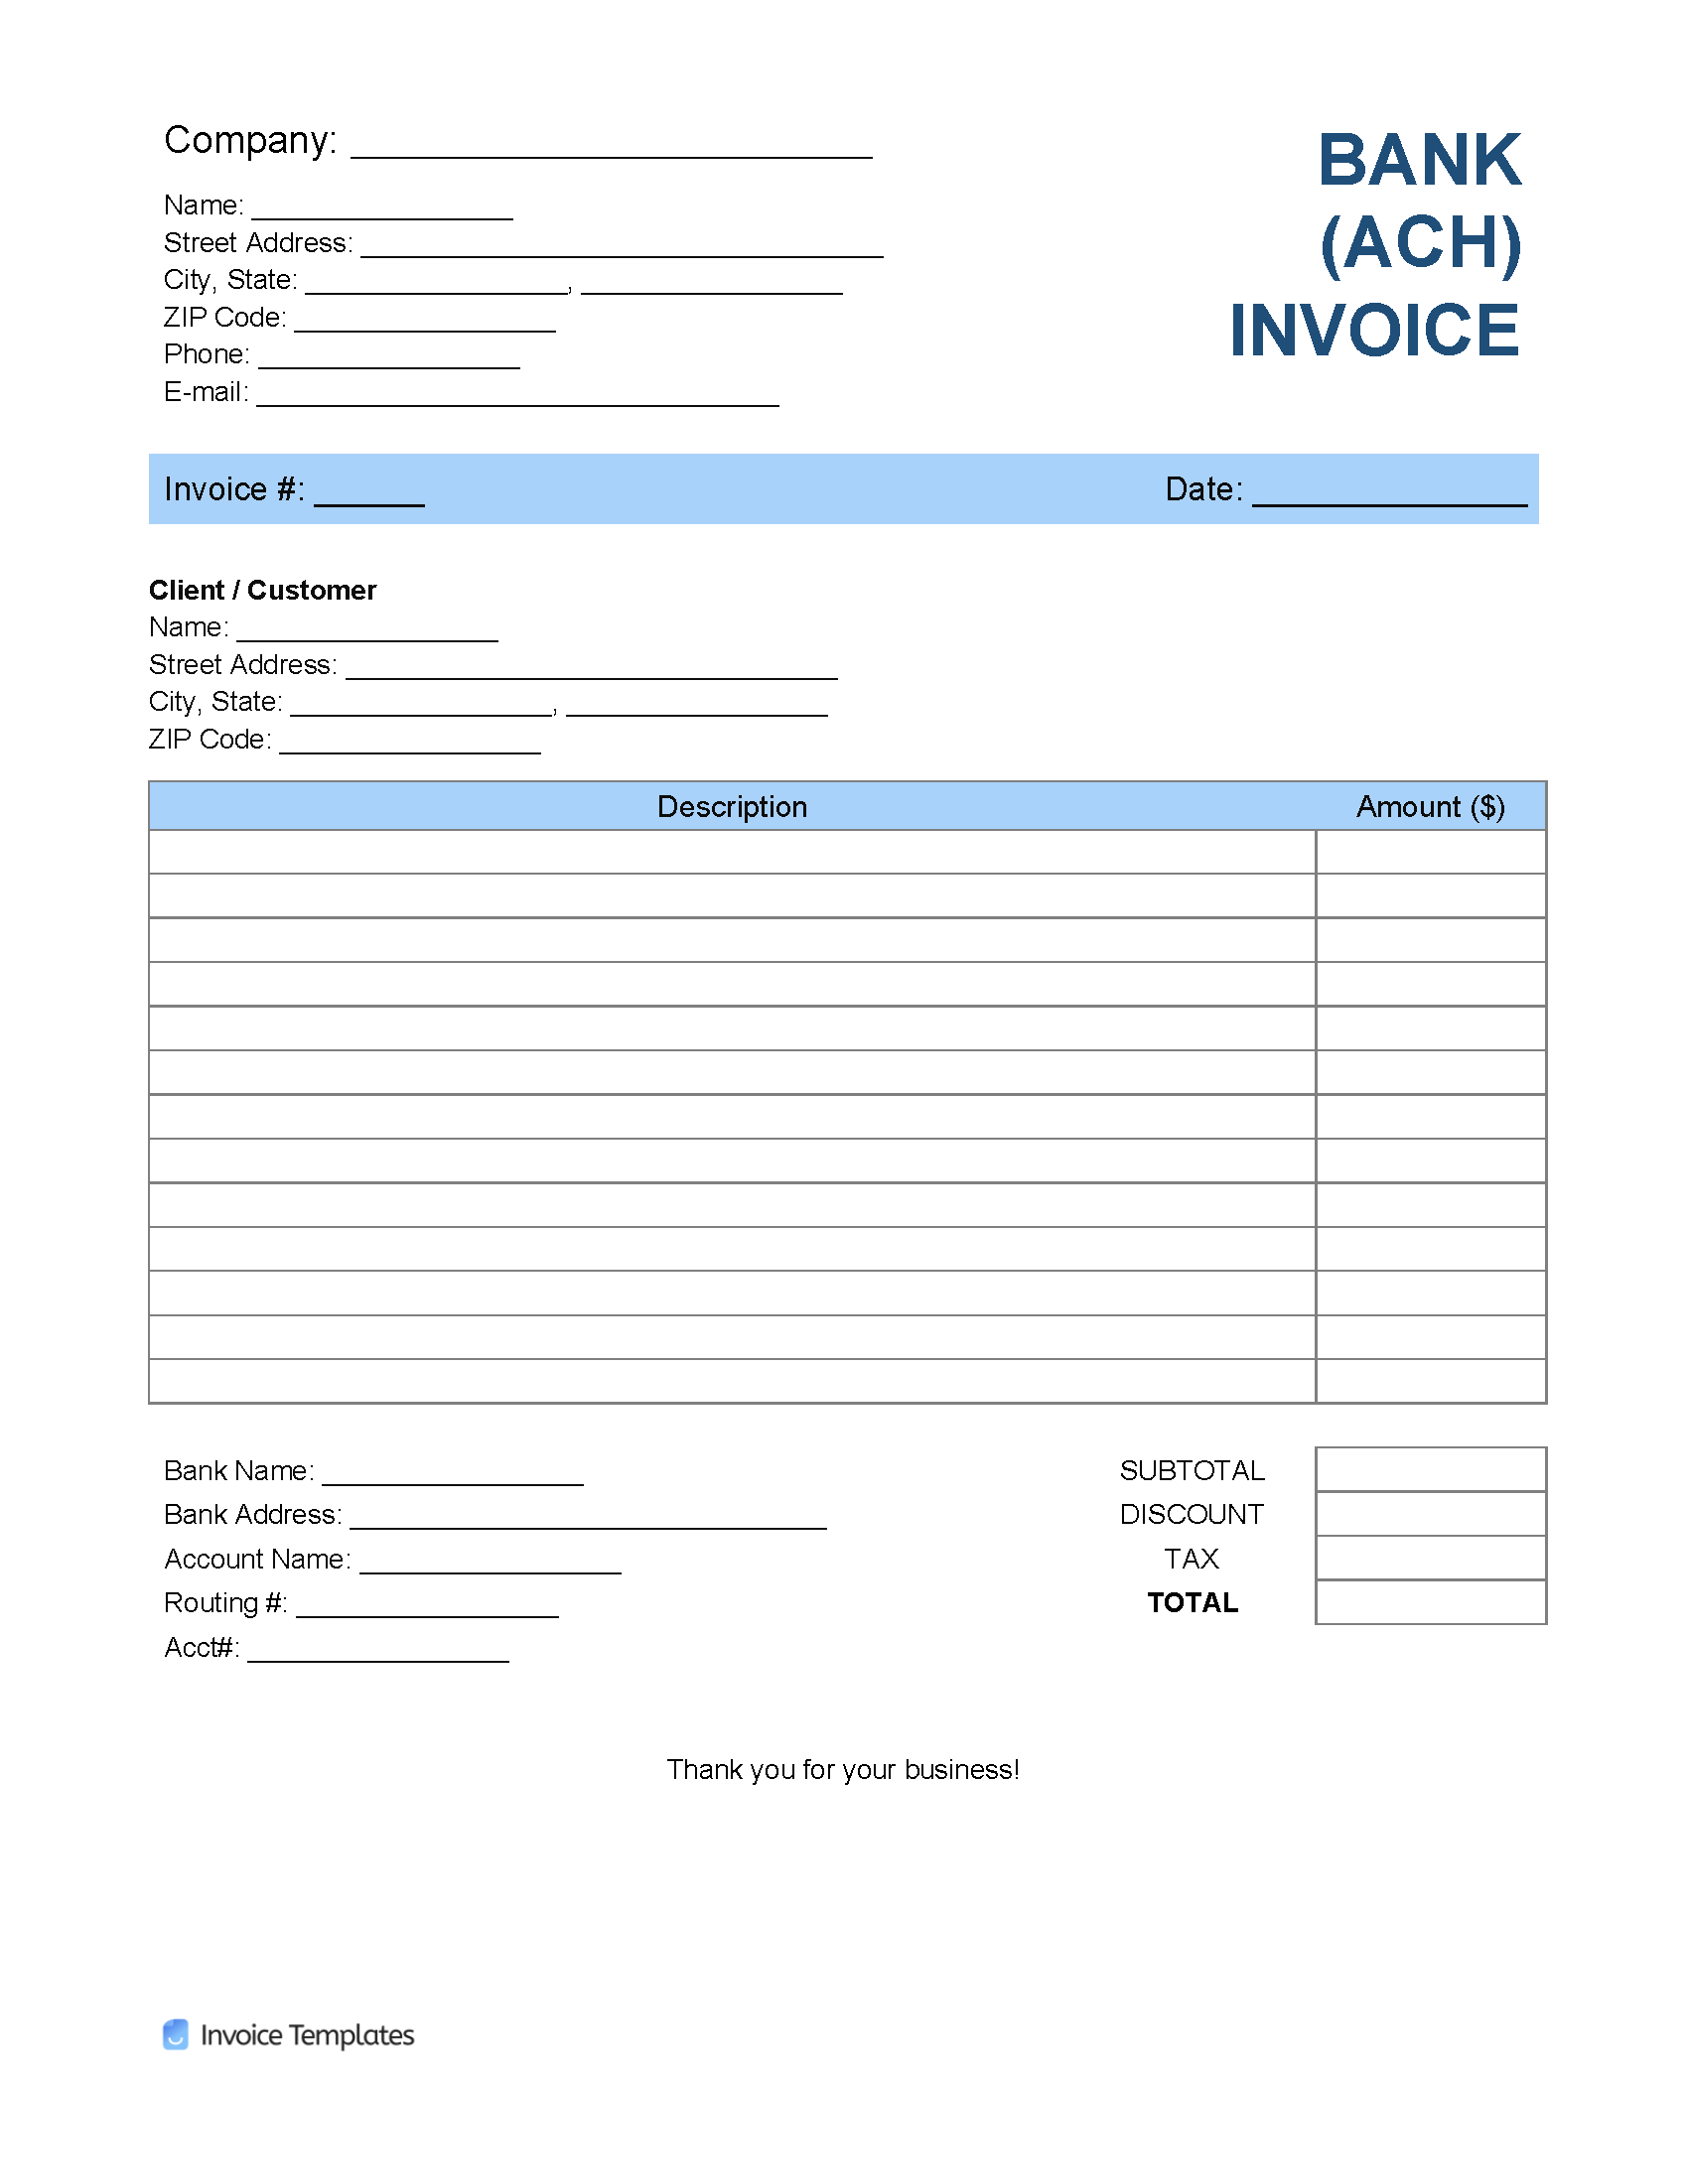 Free Bank Details Ach Invoice Template Pdf Word Excel